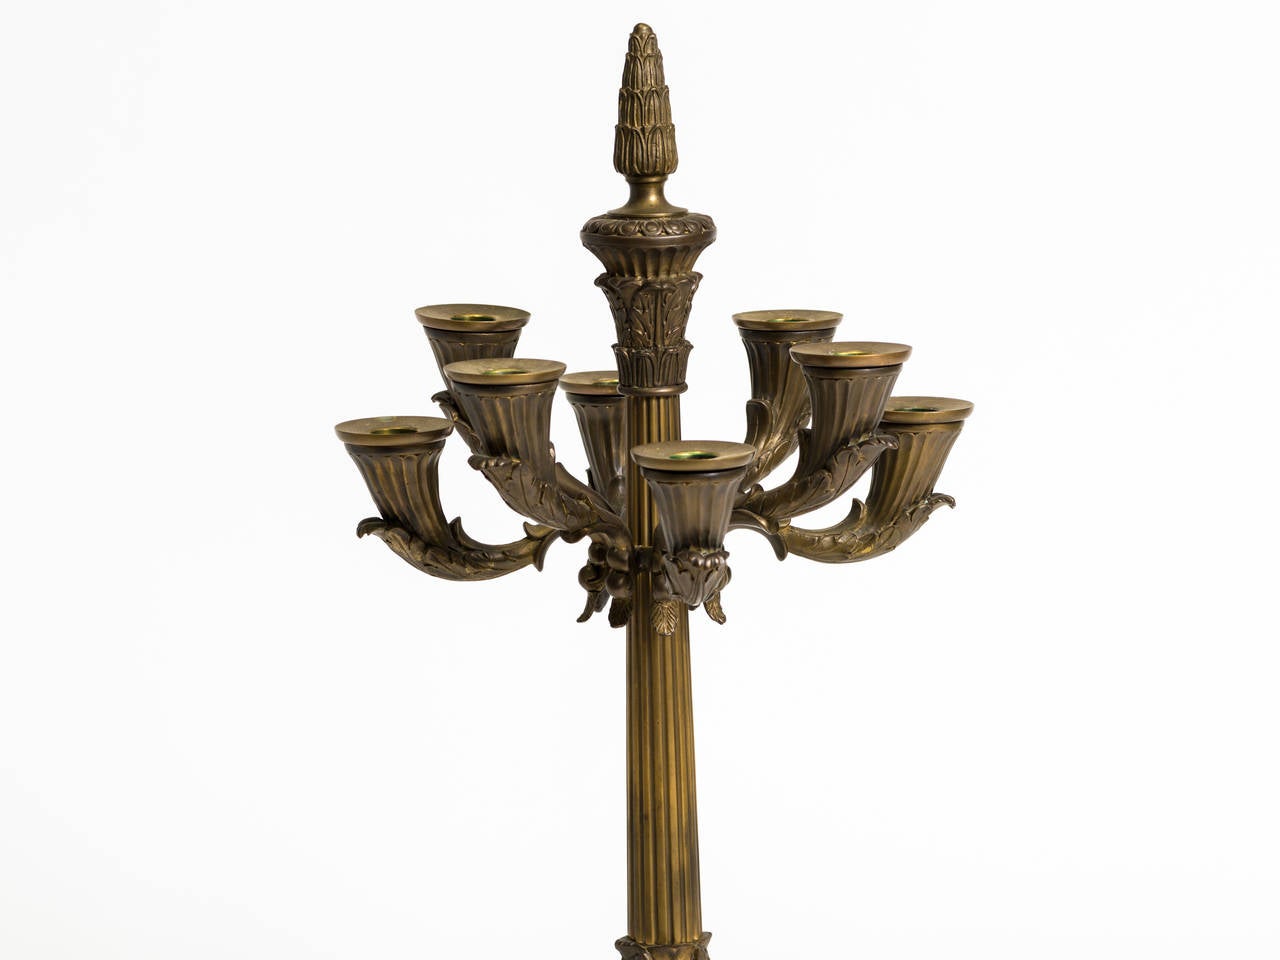 A pair of large French eight-branch candelabrum in browned bronze on a marble base,
France, circa 1960s.